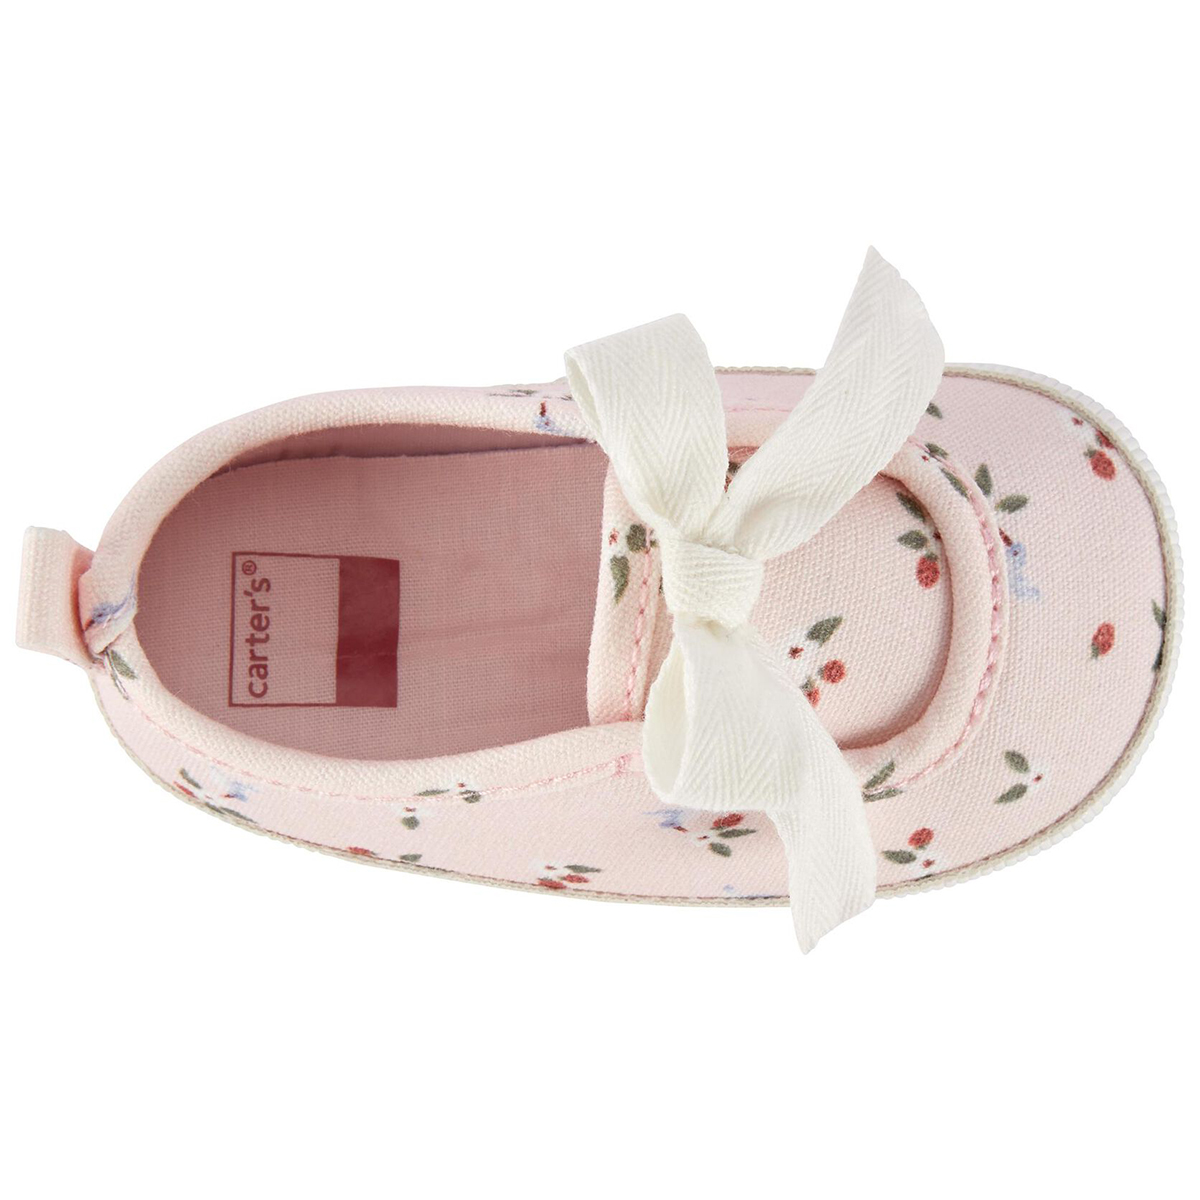 Baby Girl (NB-3M) Carter's(R) Floral Skimmers W/Bows